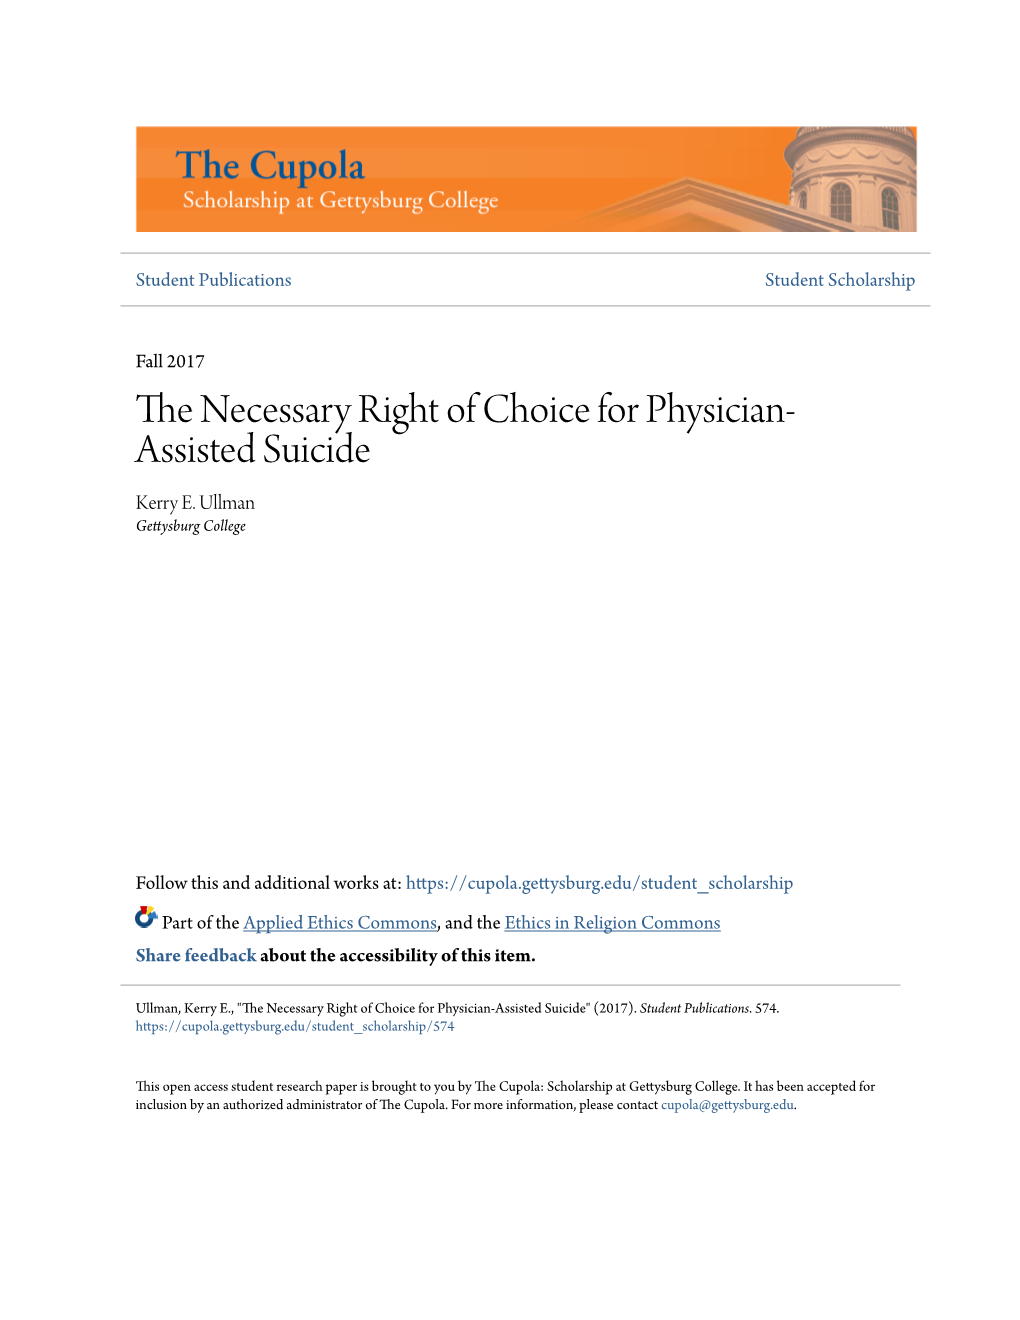 The Necessary Right of Choice for Physician-Assisted Suicide